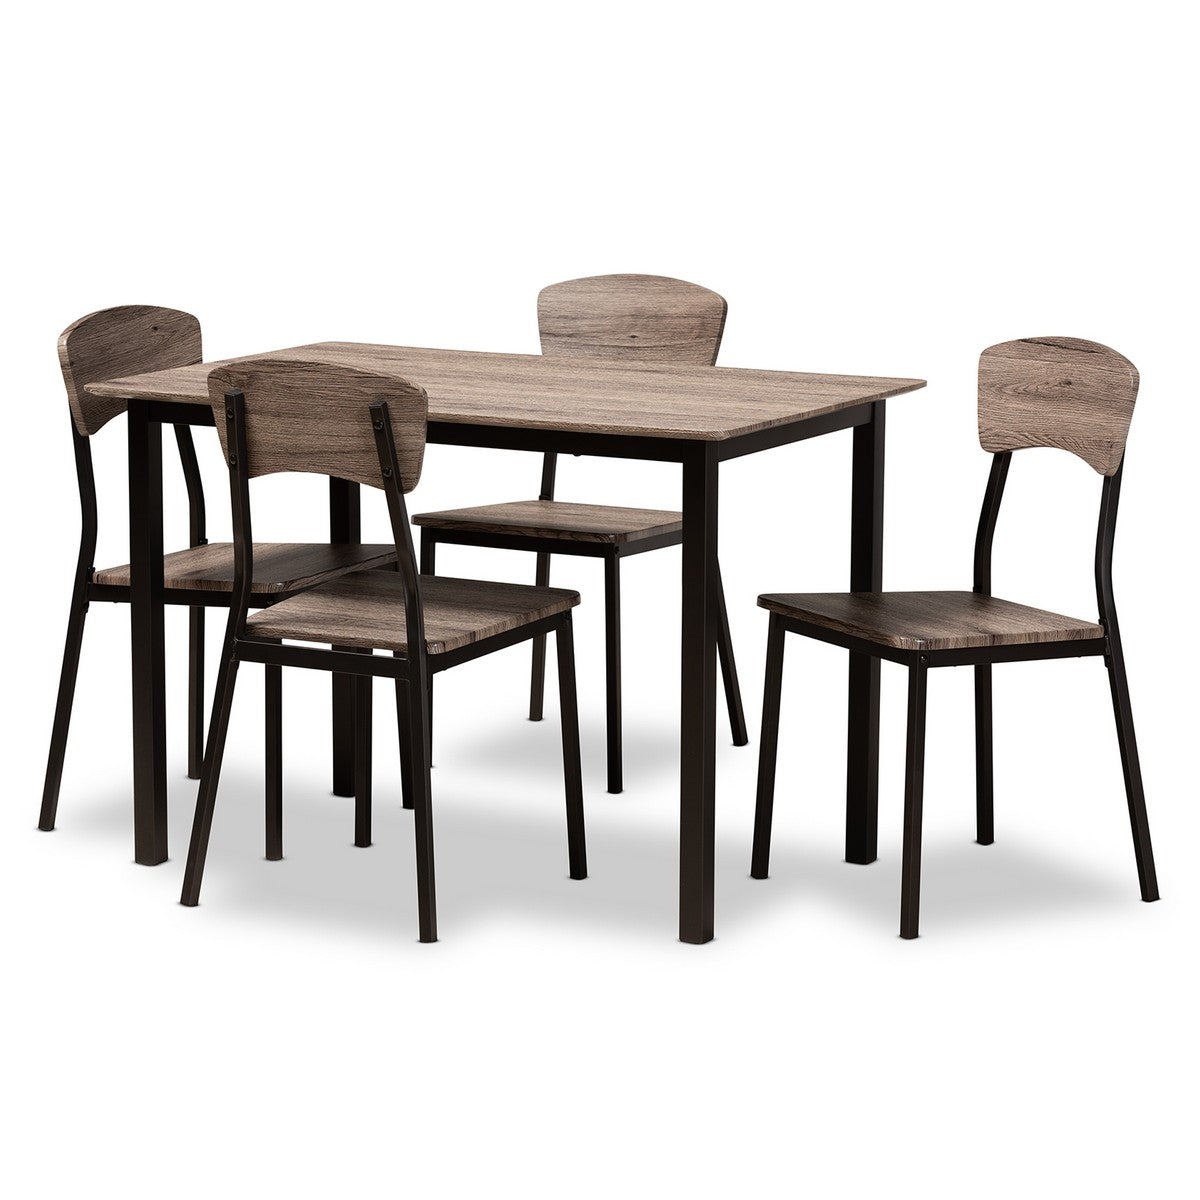 Baxton Studio Marcus Modern Industrial Black Metal and Rustic Oak Brown Finished Wood 5-Piece Dining Set Baxton Studio-Dining Sets-Minimal And Modern - 1